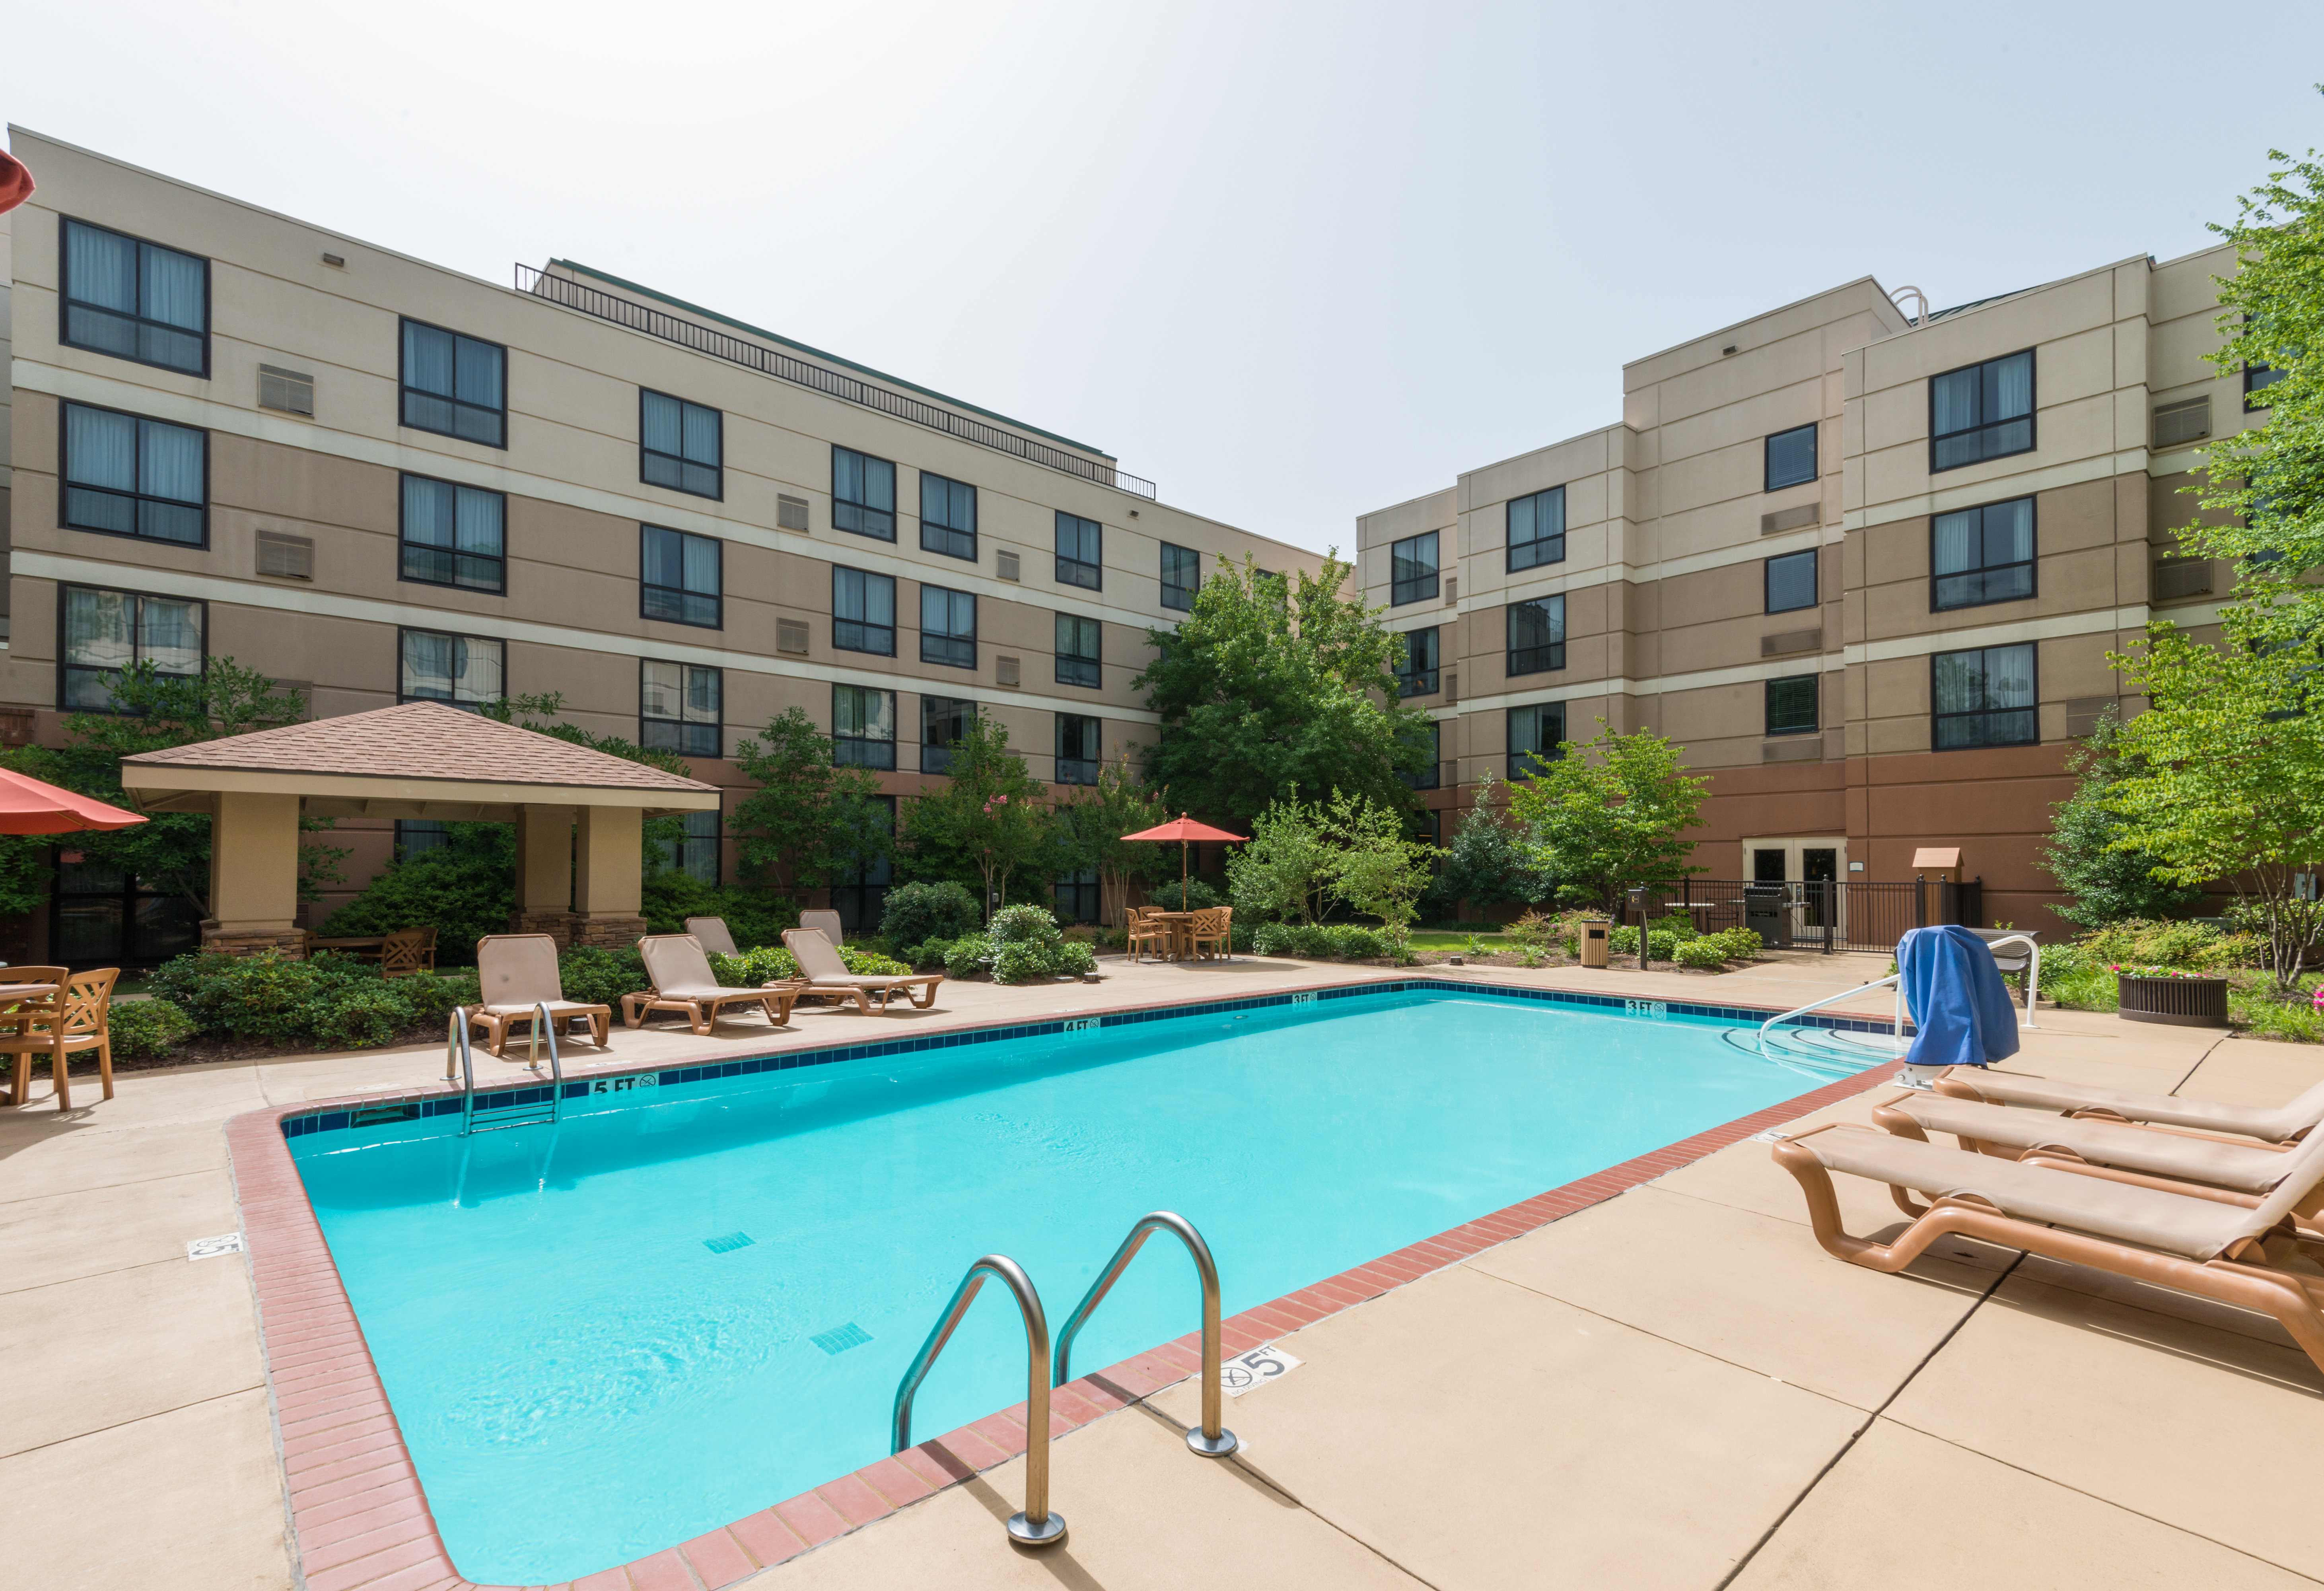 Join us for a dip in our refreshing seasonal outdoor pool!